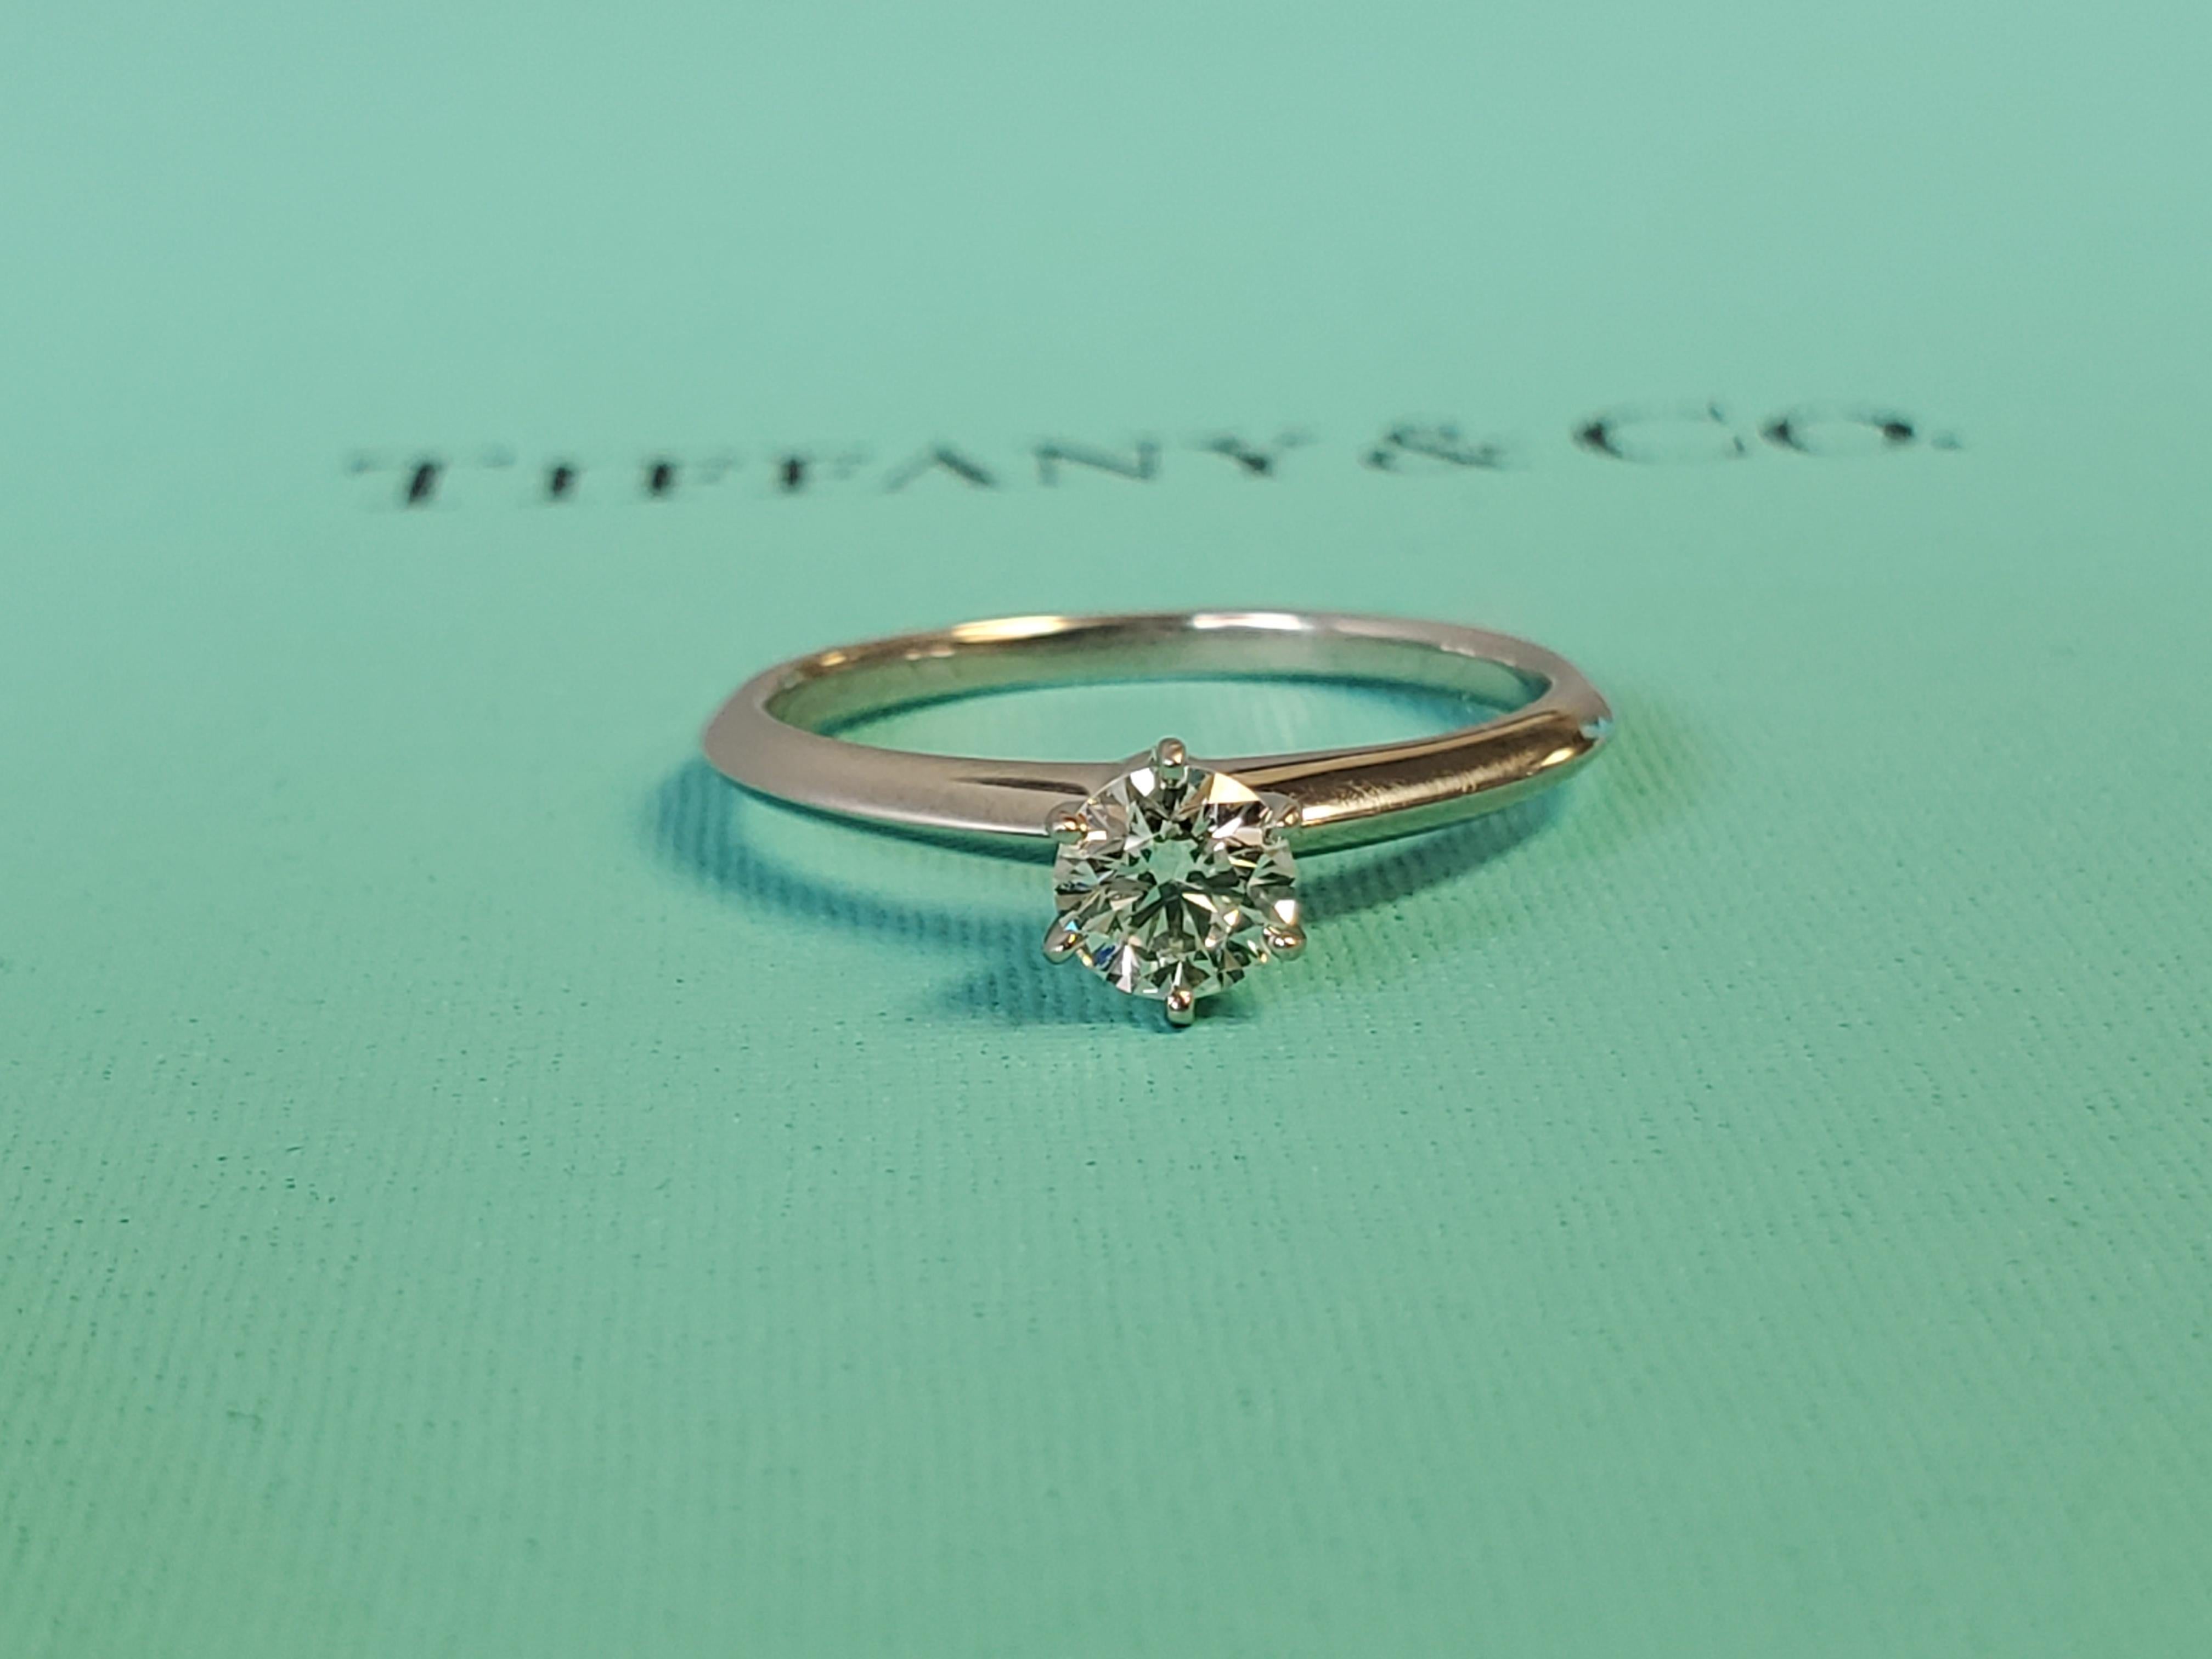 Listed is a like new Tiffany & Co. platinum diamond solitaire engagement ring complete with boxes and papers. I don't believe this ring has ever been worn and it is dated July 23', everything is pristine. The center stone is a .46ct I VS1 round